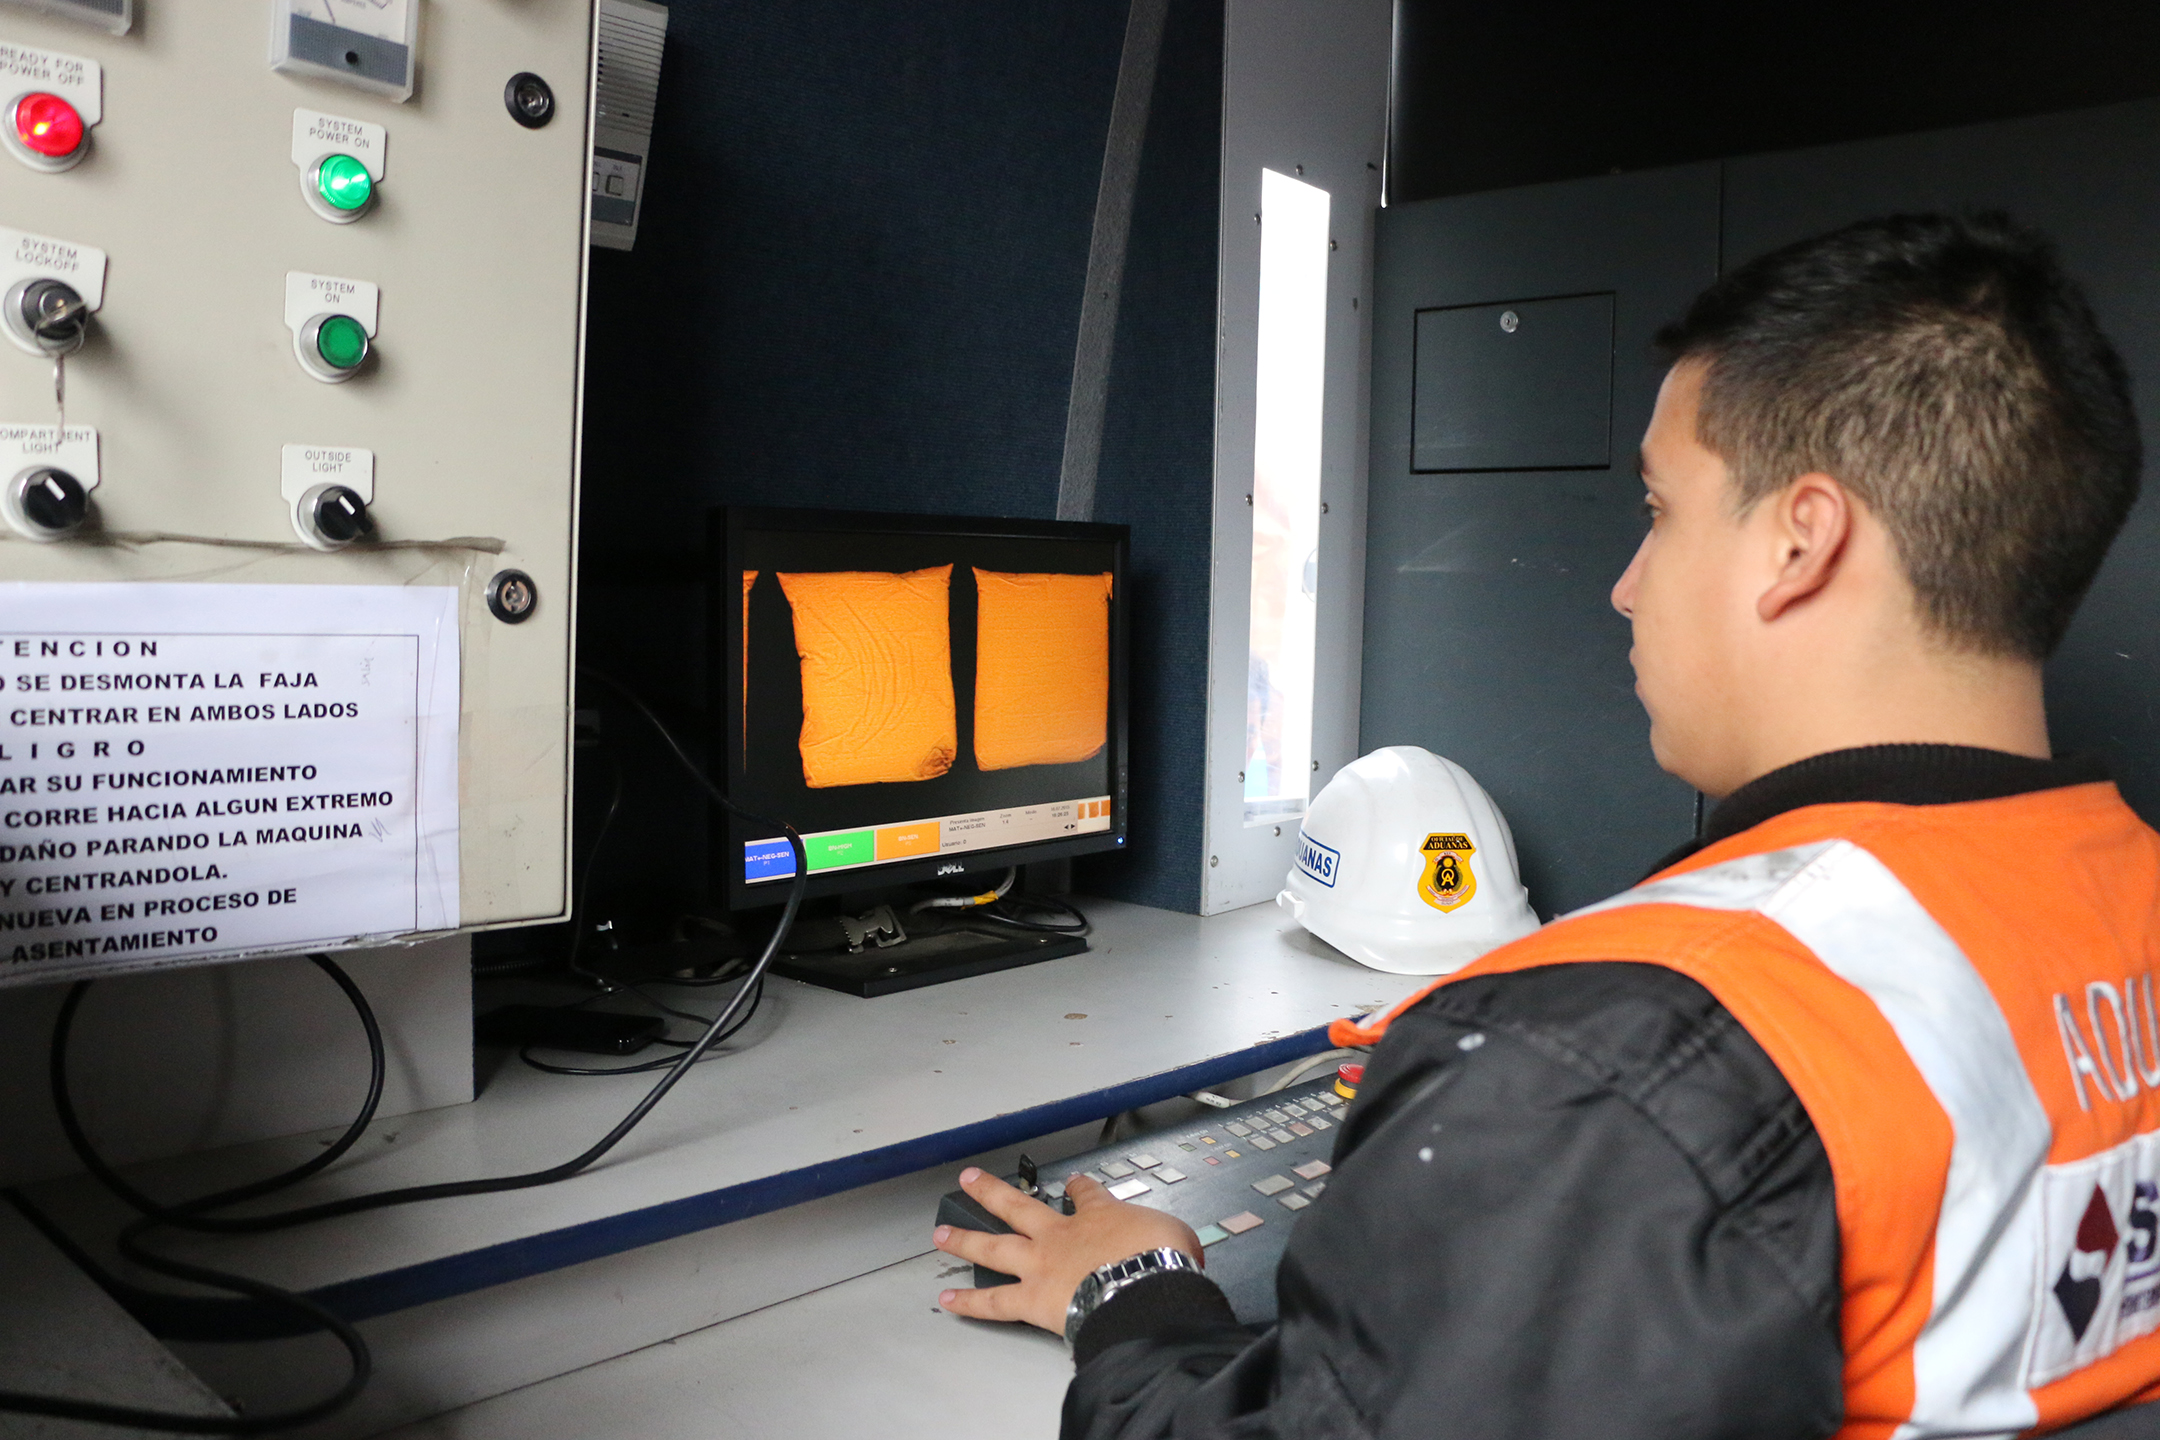 Photo of a Peruvian Customs officer examining bags of quinoa using an X-ray screening system in Calleo, Peru.